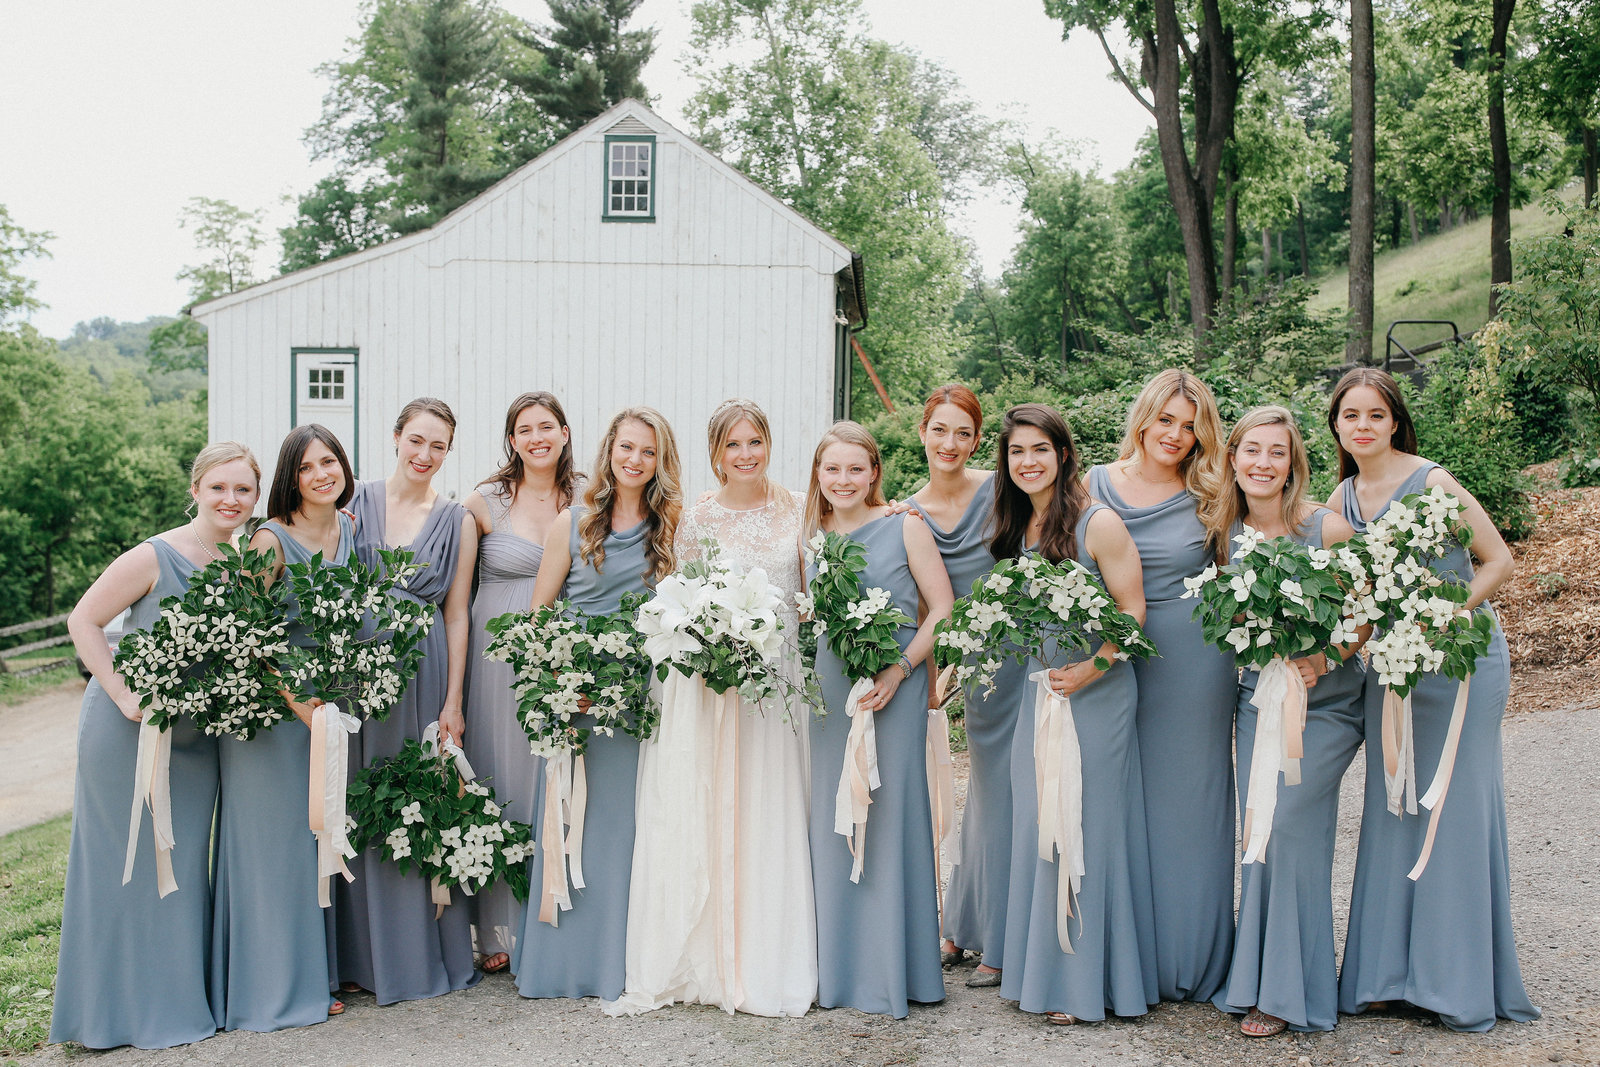 So many gorgeous ladies in one photo! The bridesmaids each carried a Dogwood branch by Wild Stems.